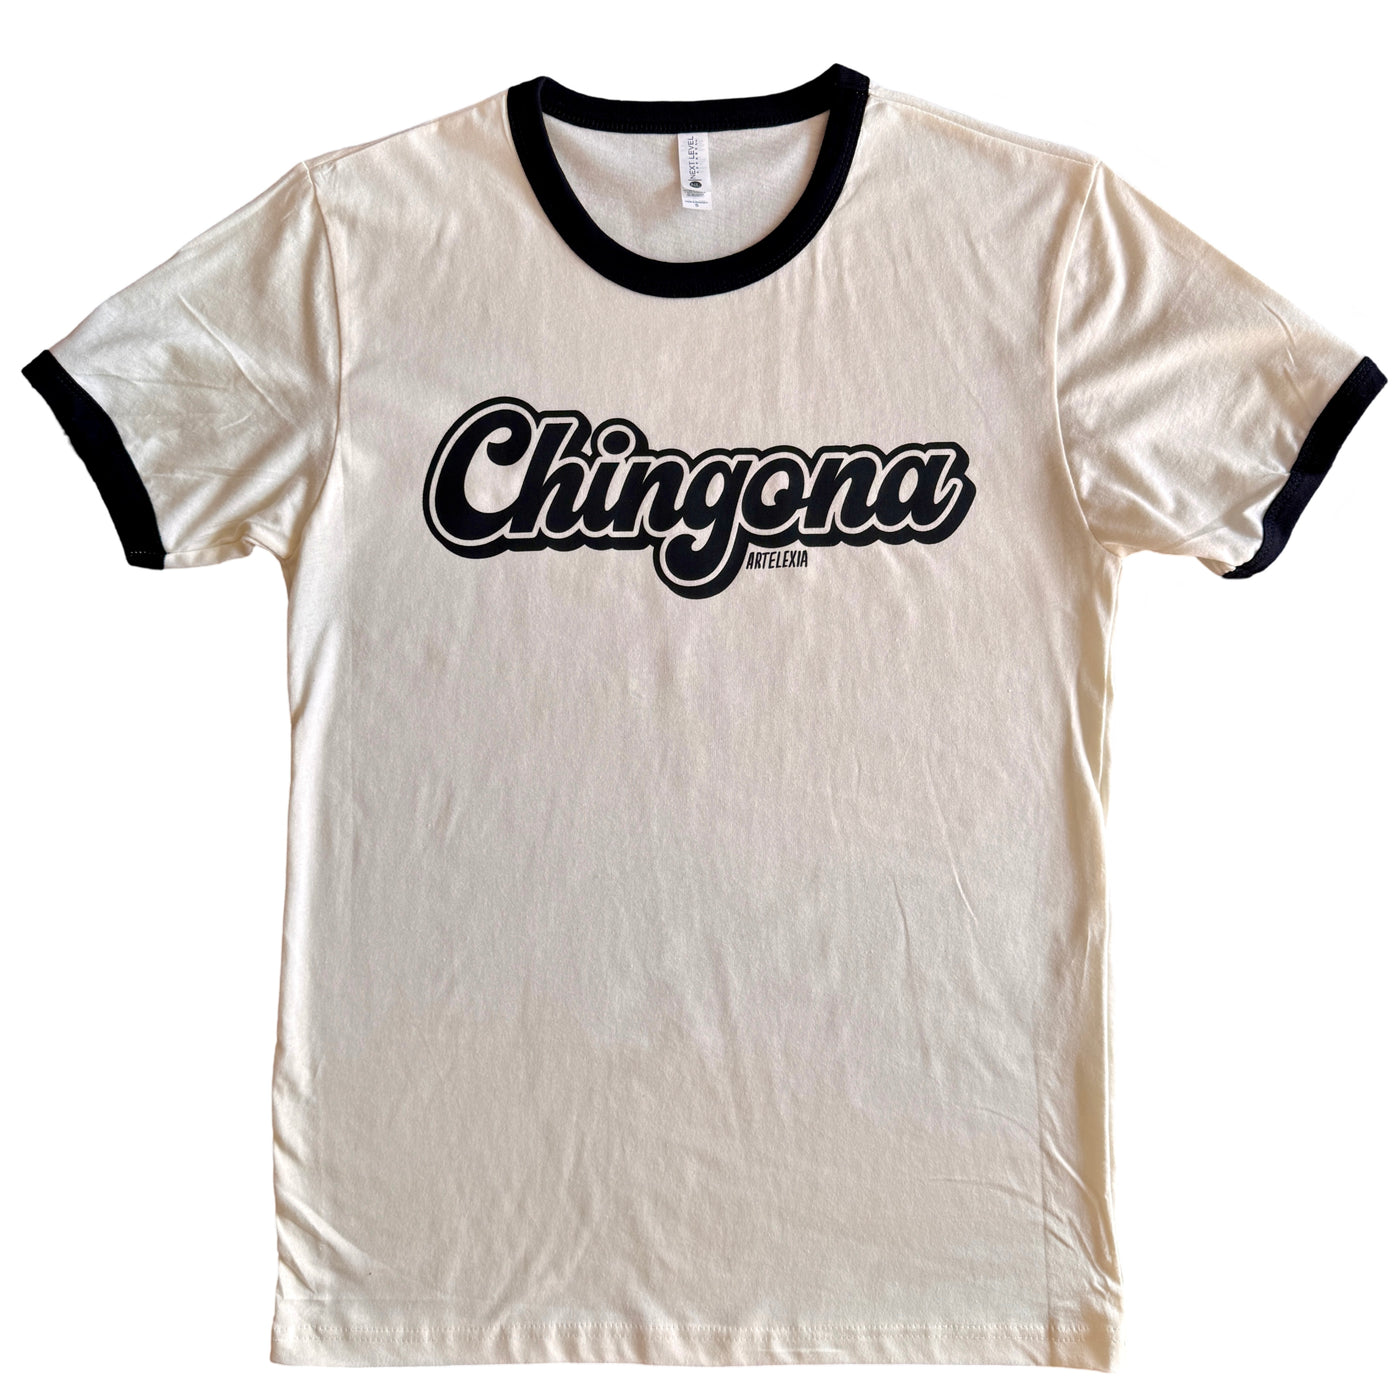 White tee shirt with black trim around collar and opening of sleeves. Black retro graphic across the chest that reads "Chingona"